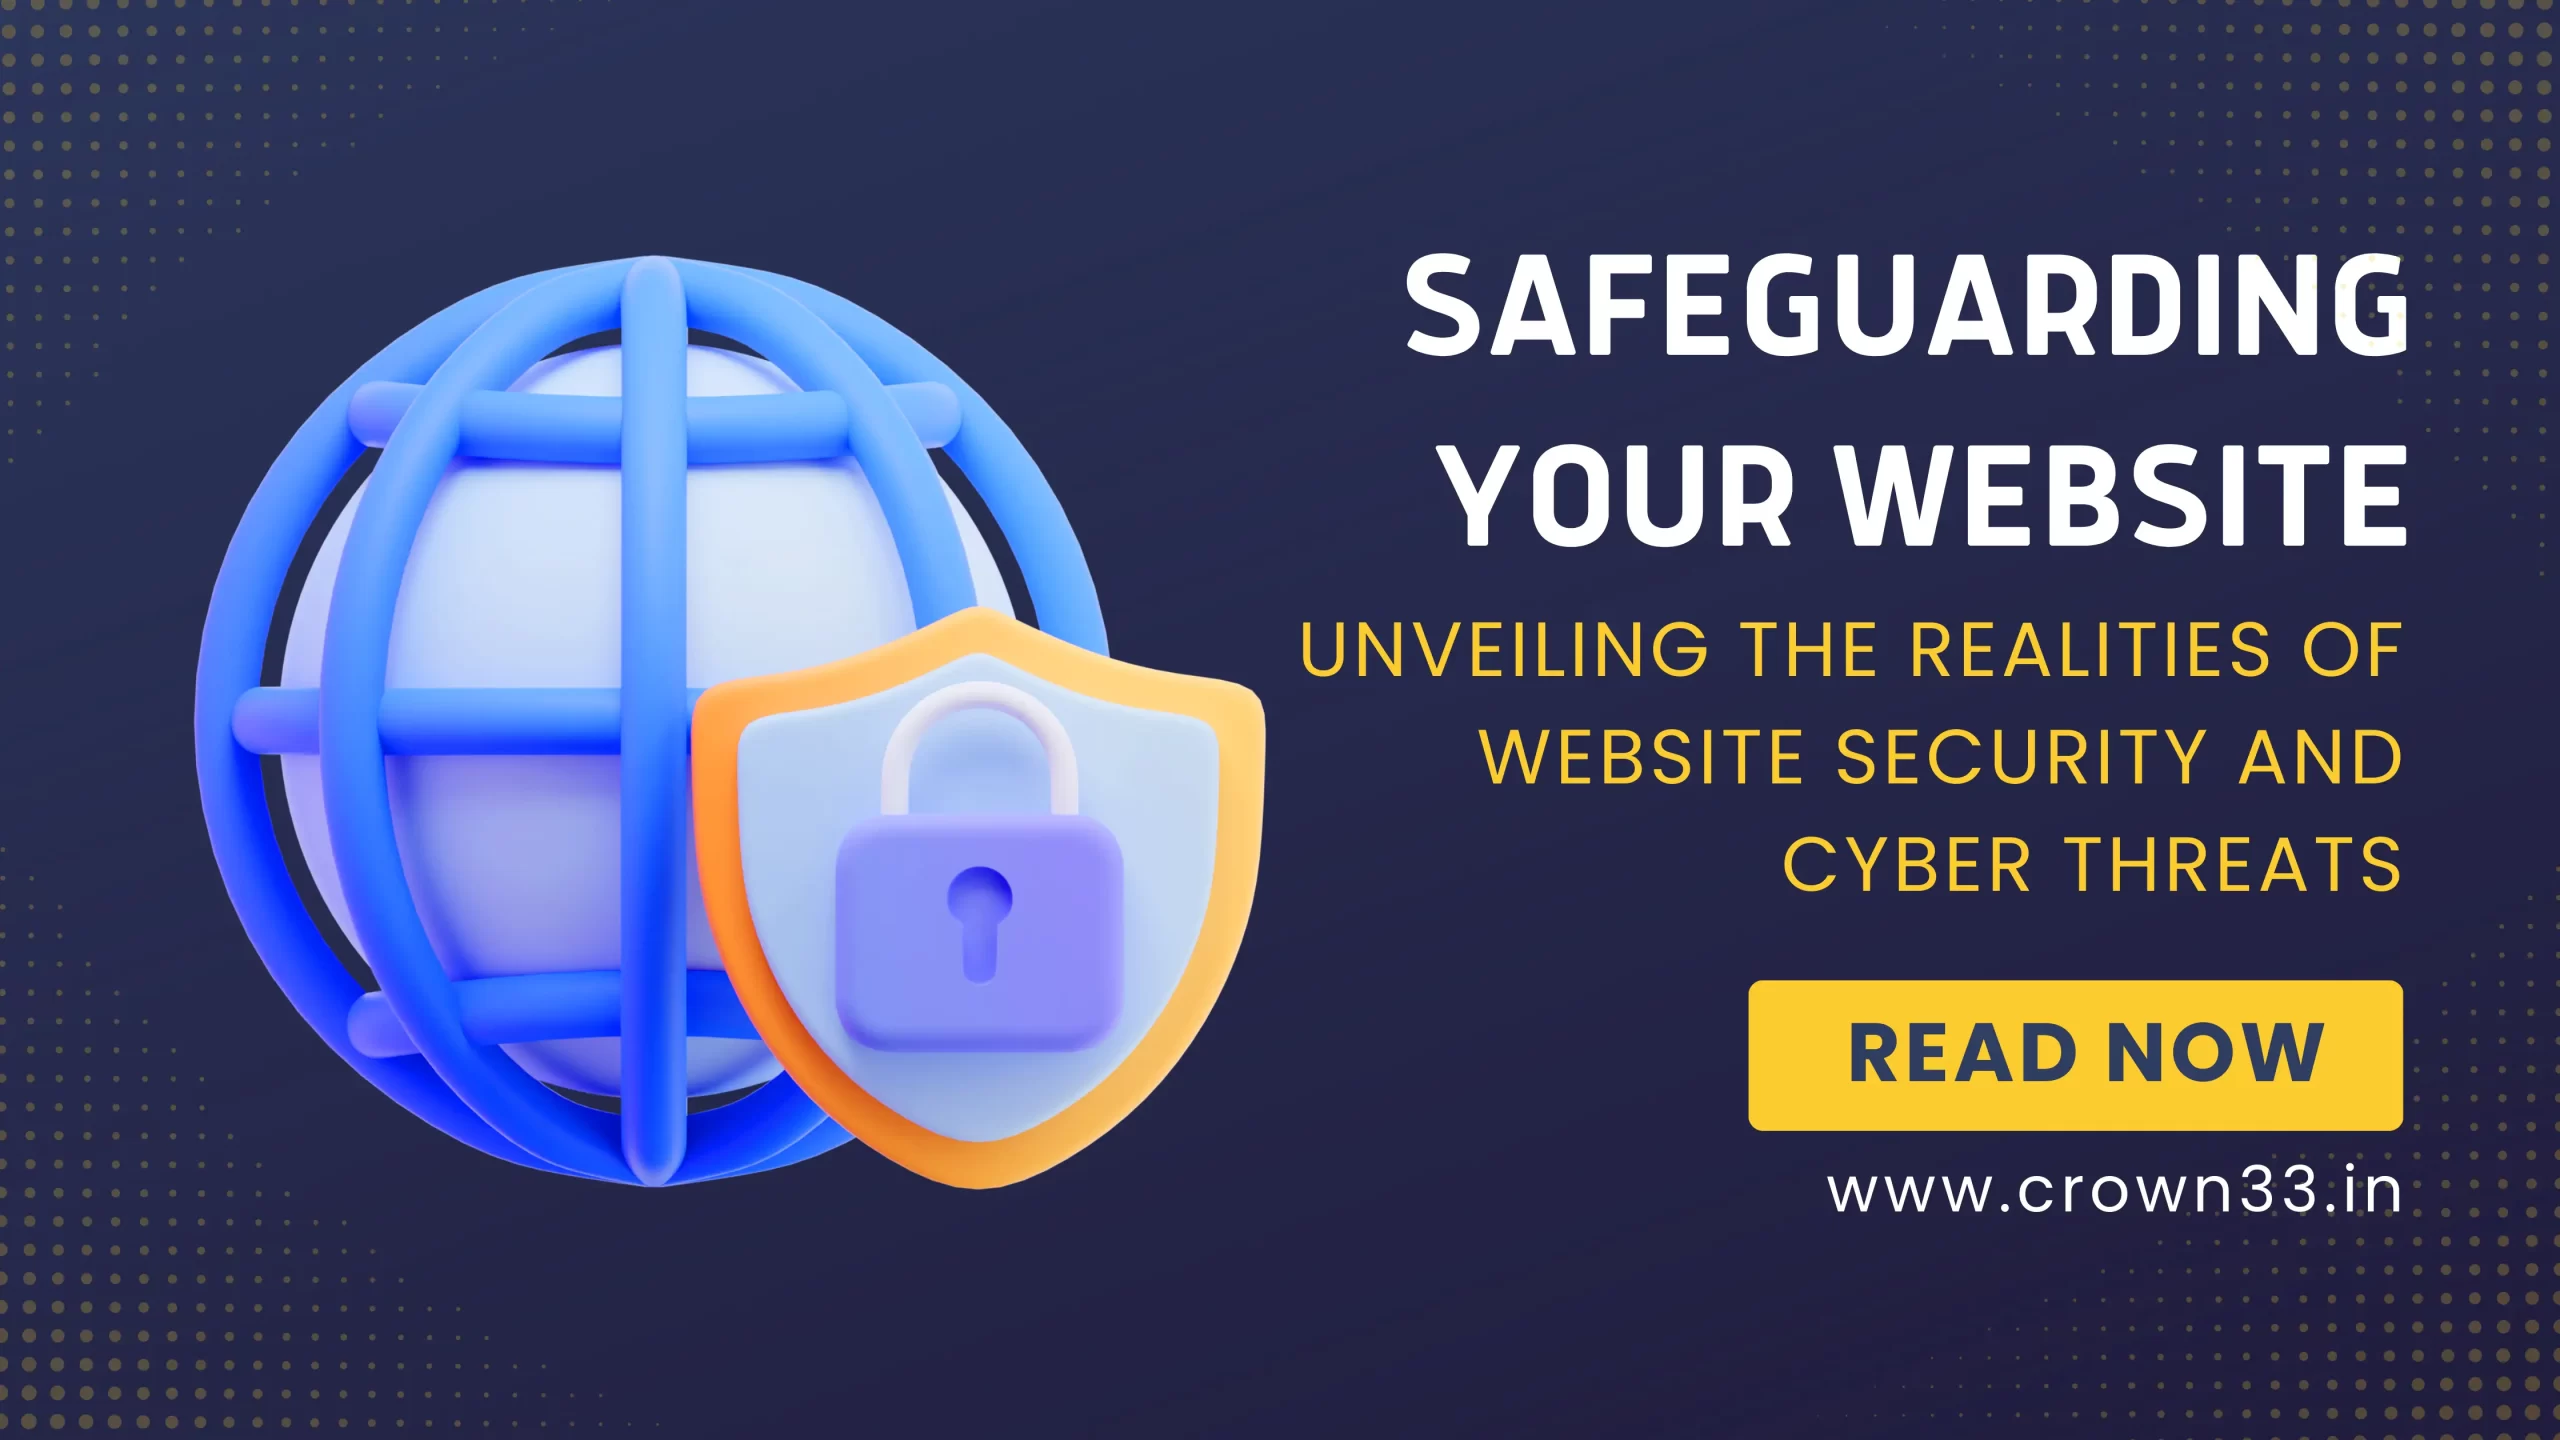 Safeguarding Your Website: Unveiling the Realities of Website Security and Cyber Threats